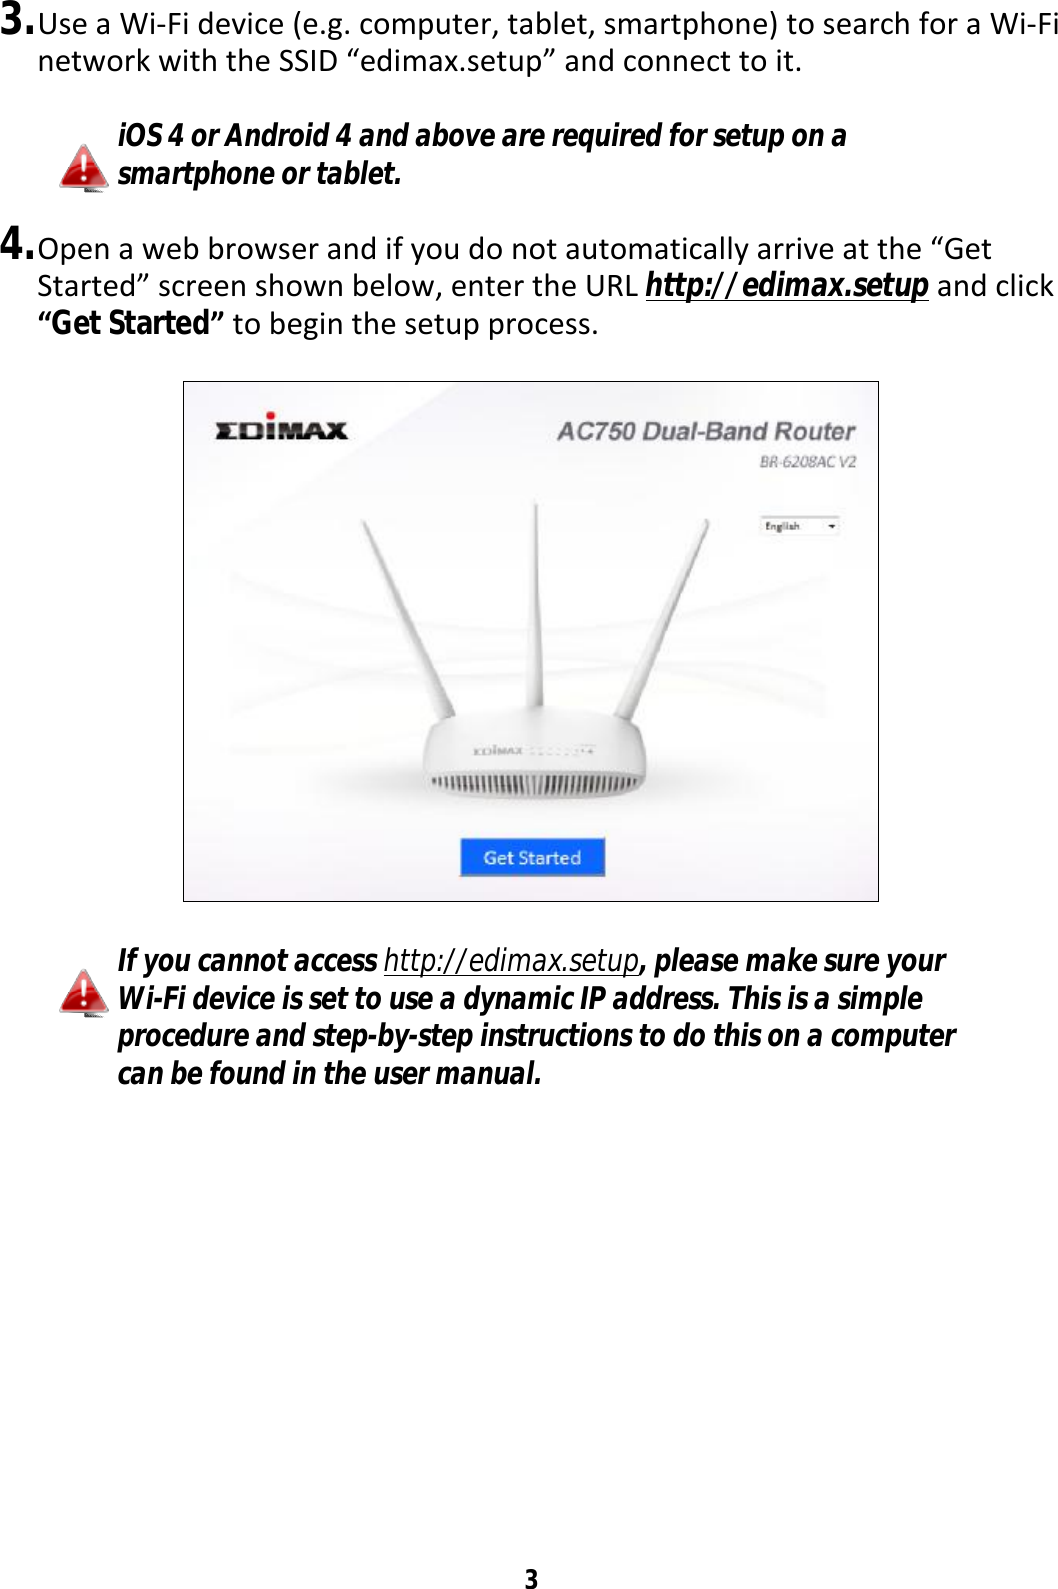 3  3. Use a Wi-Fi device (e.g. computer, tablet, smartphone) to search for a Wi-Fi network with the SSID “edimax.setup” and connect to it.  iOS 4 or Android 4 and above are required for setup on a smartphone or tablet.  4. Open a web browser and if you do not automatically arrive at the “Get Started” screen shown below, enter the URL http://edimax.setup and click “Get Started” to begin the setup process.    If you cannot access http://edimax.setup, please make sure your Wi-Fi device is set to use a dynamic IP address. This is a simple procedure and step-by-step instructions to do this on a computer can be found in the user manual. 